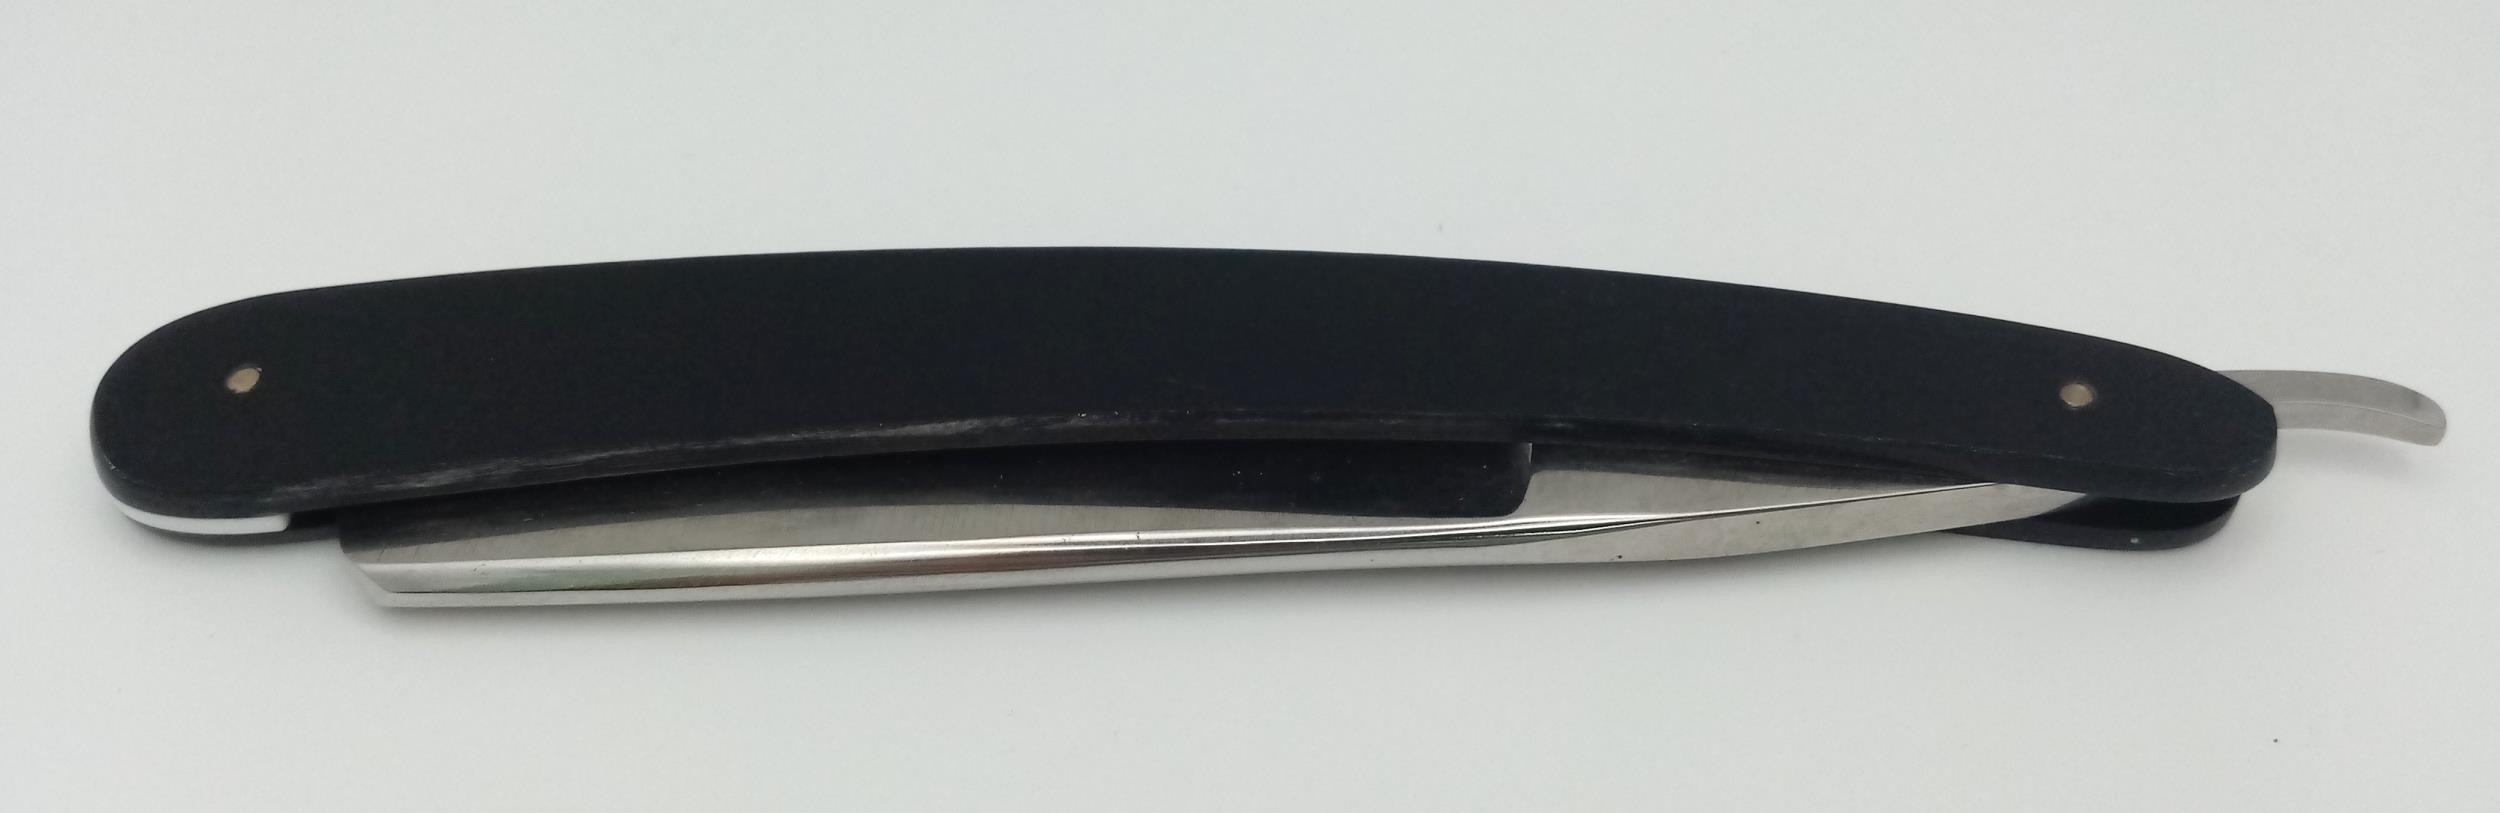 3rd Reich Patriotic Cut Throat Razor. Blade has been etched “Made from steel from the Volks Wagen - Image 5 of 6